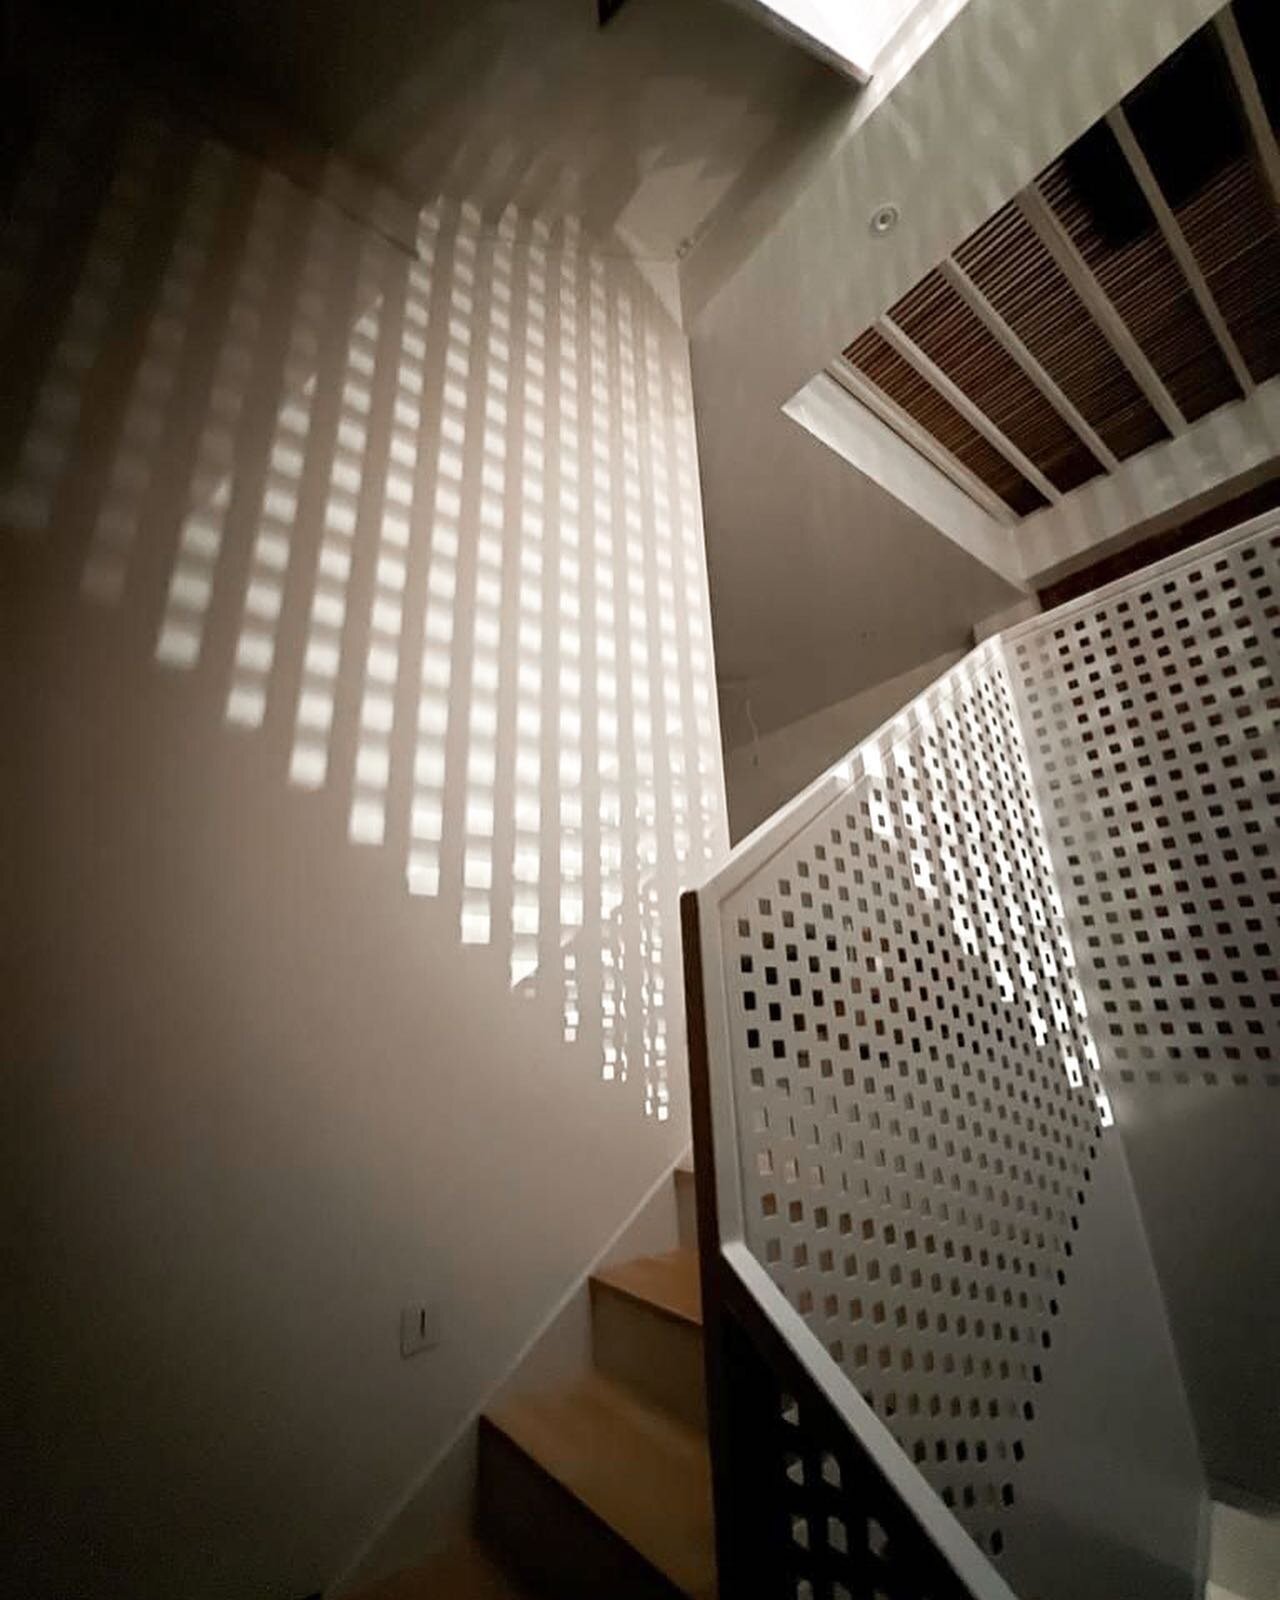 - LIGHT CATCHER HOUSE- (1/3)
Singapore,2022
. 
Light introduced from the sun scoops are reflected into the stairwell, casting intriguing shadows through the perforated railings, creating a warmer, more welcoming and definitely brighter journey up and